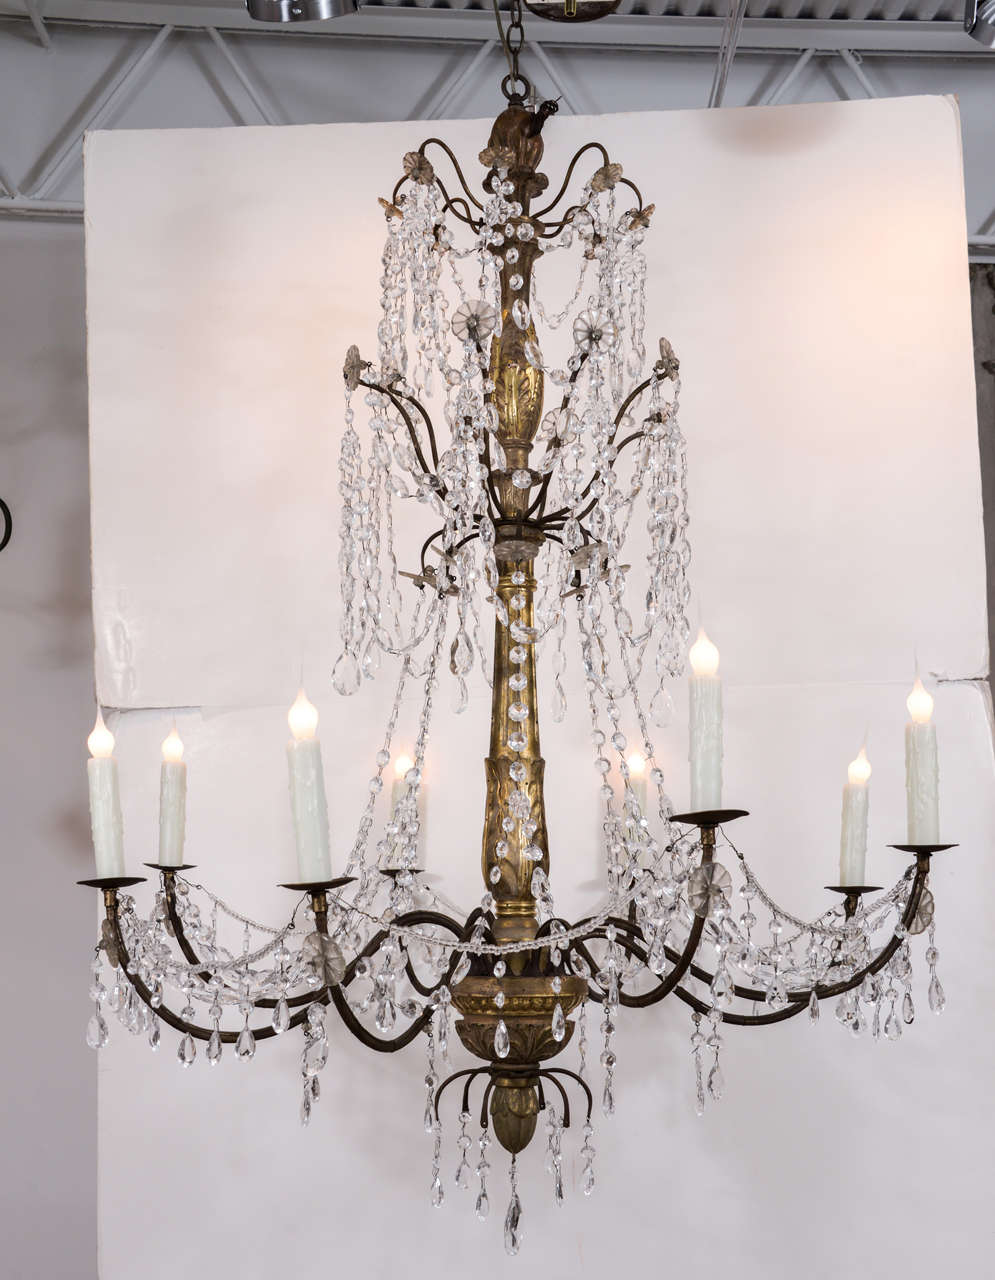 Large early 19th century three-tier chandelier from Genoa, with a carved wooden body with remnants of original gilding and eight iron arms, with crystal flower motifs, draped in clear glass bead chains with suspended crystal pendants. This